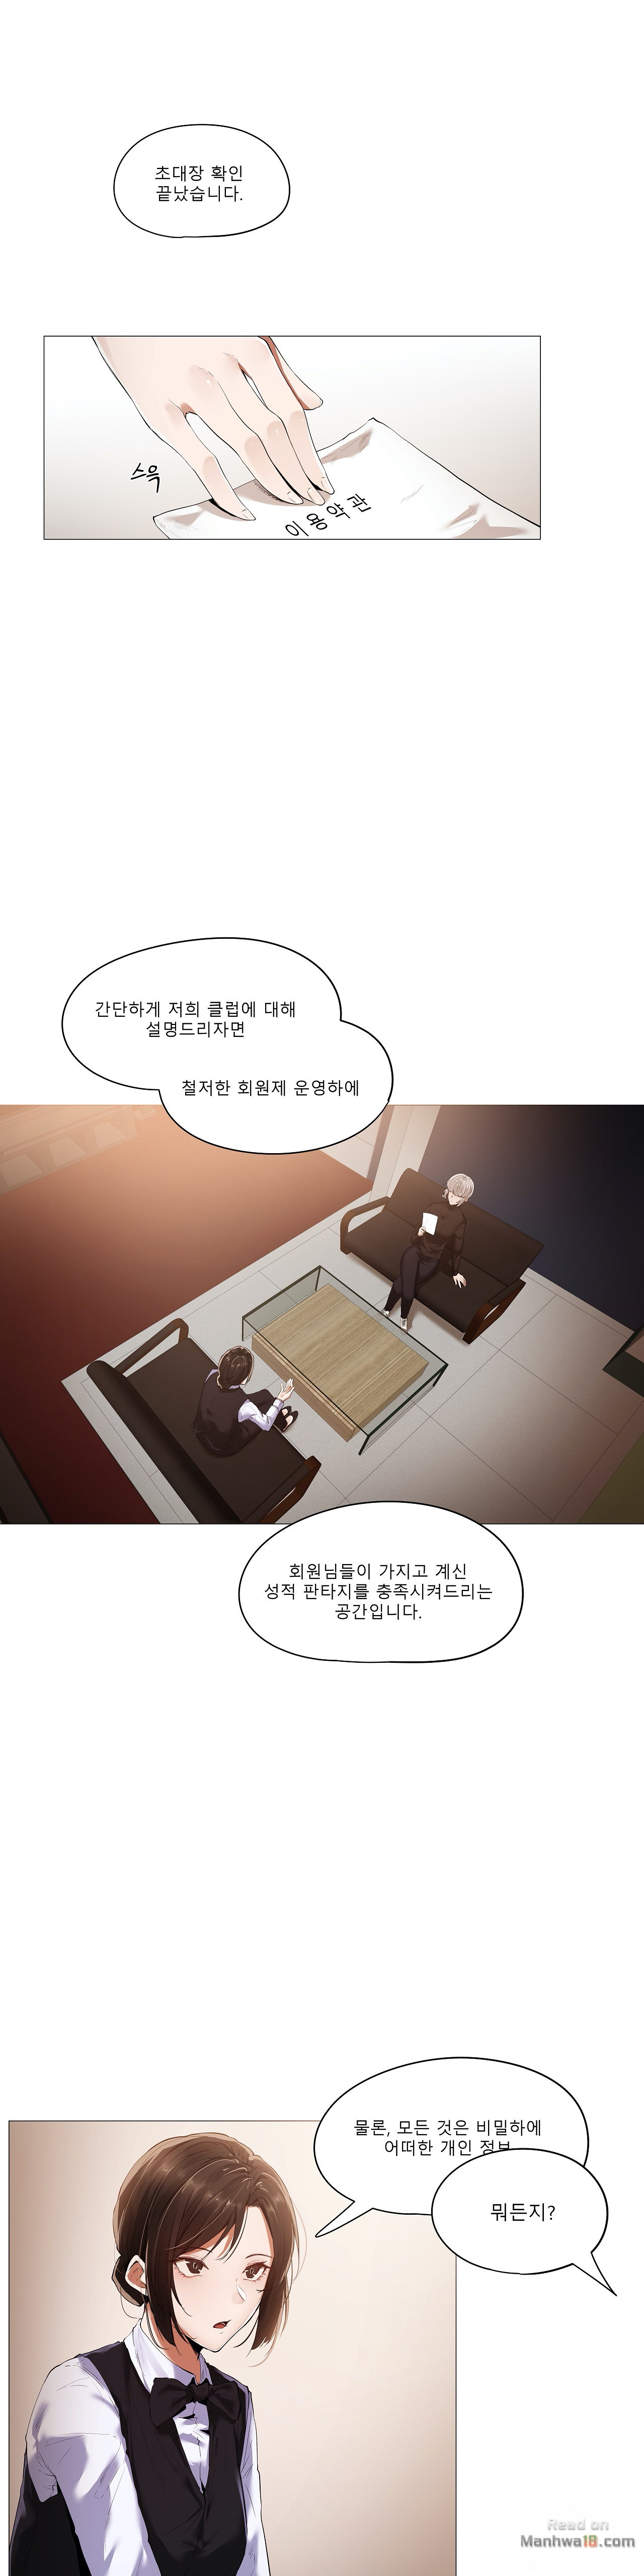 Will You Go Home Raw - Chapter 13 Page 3